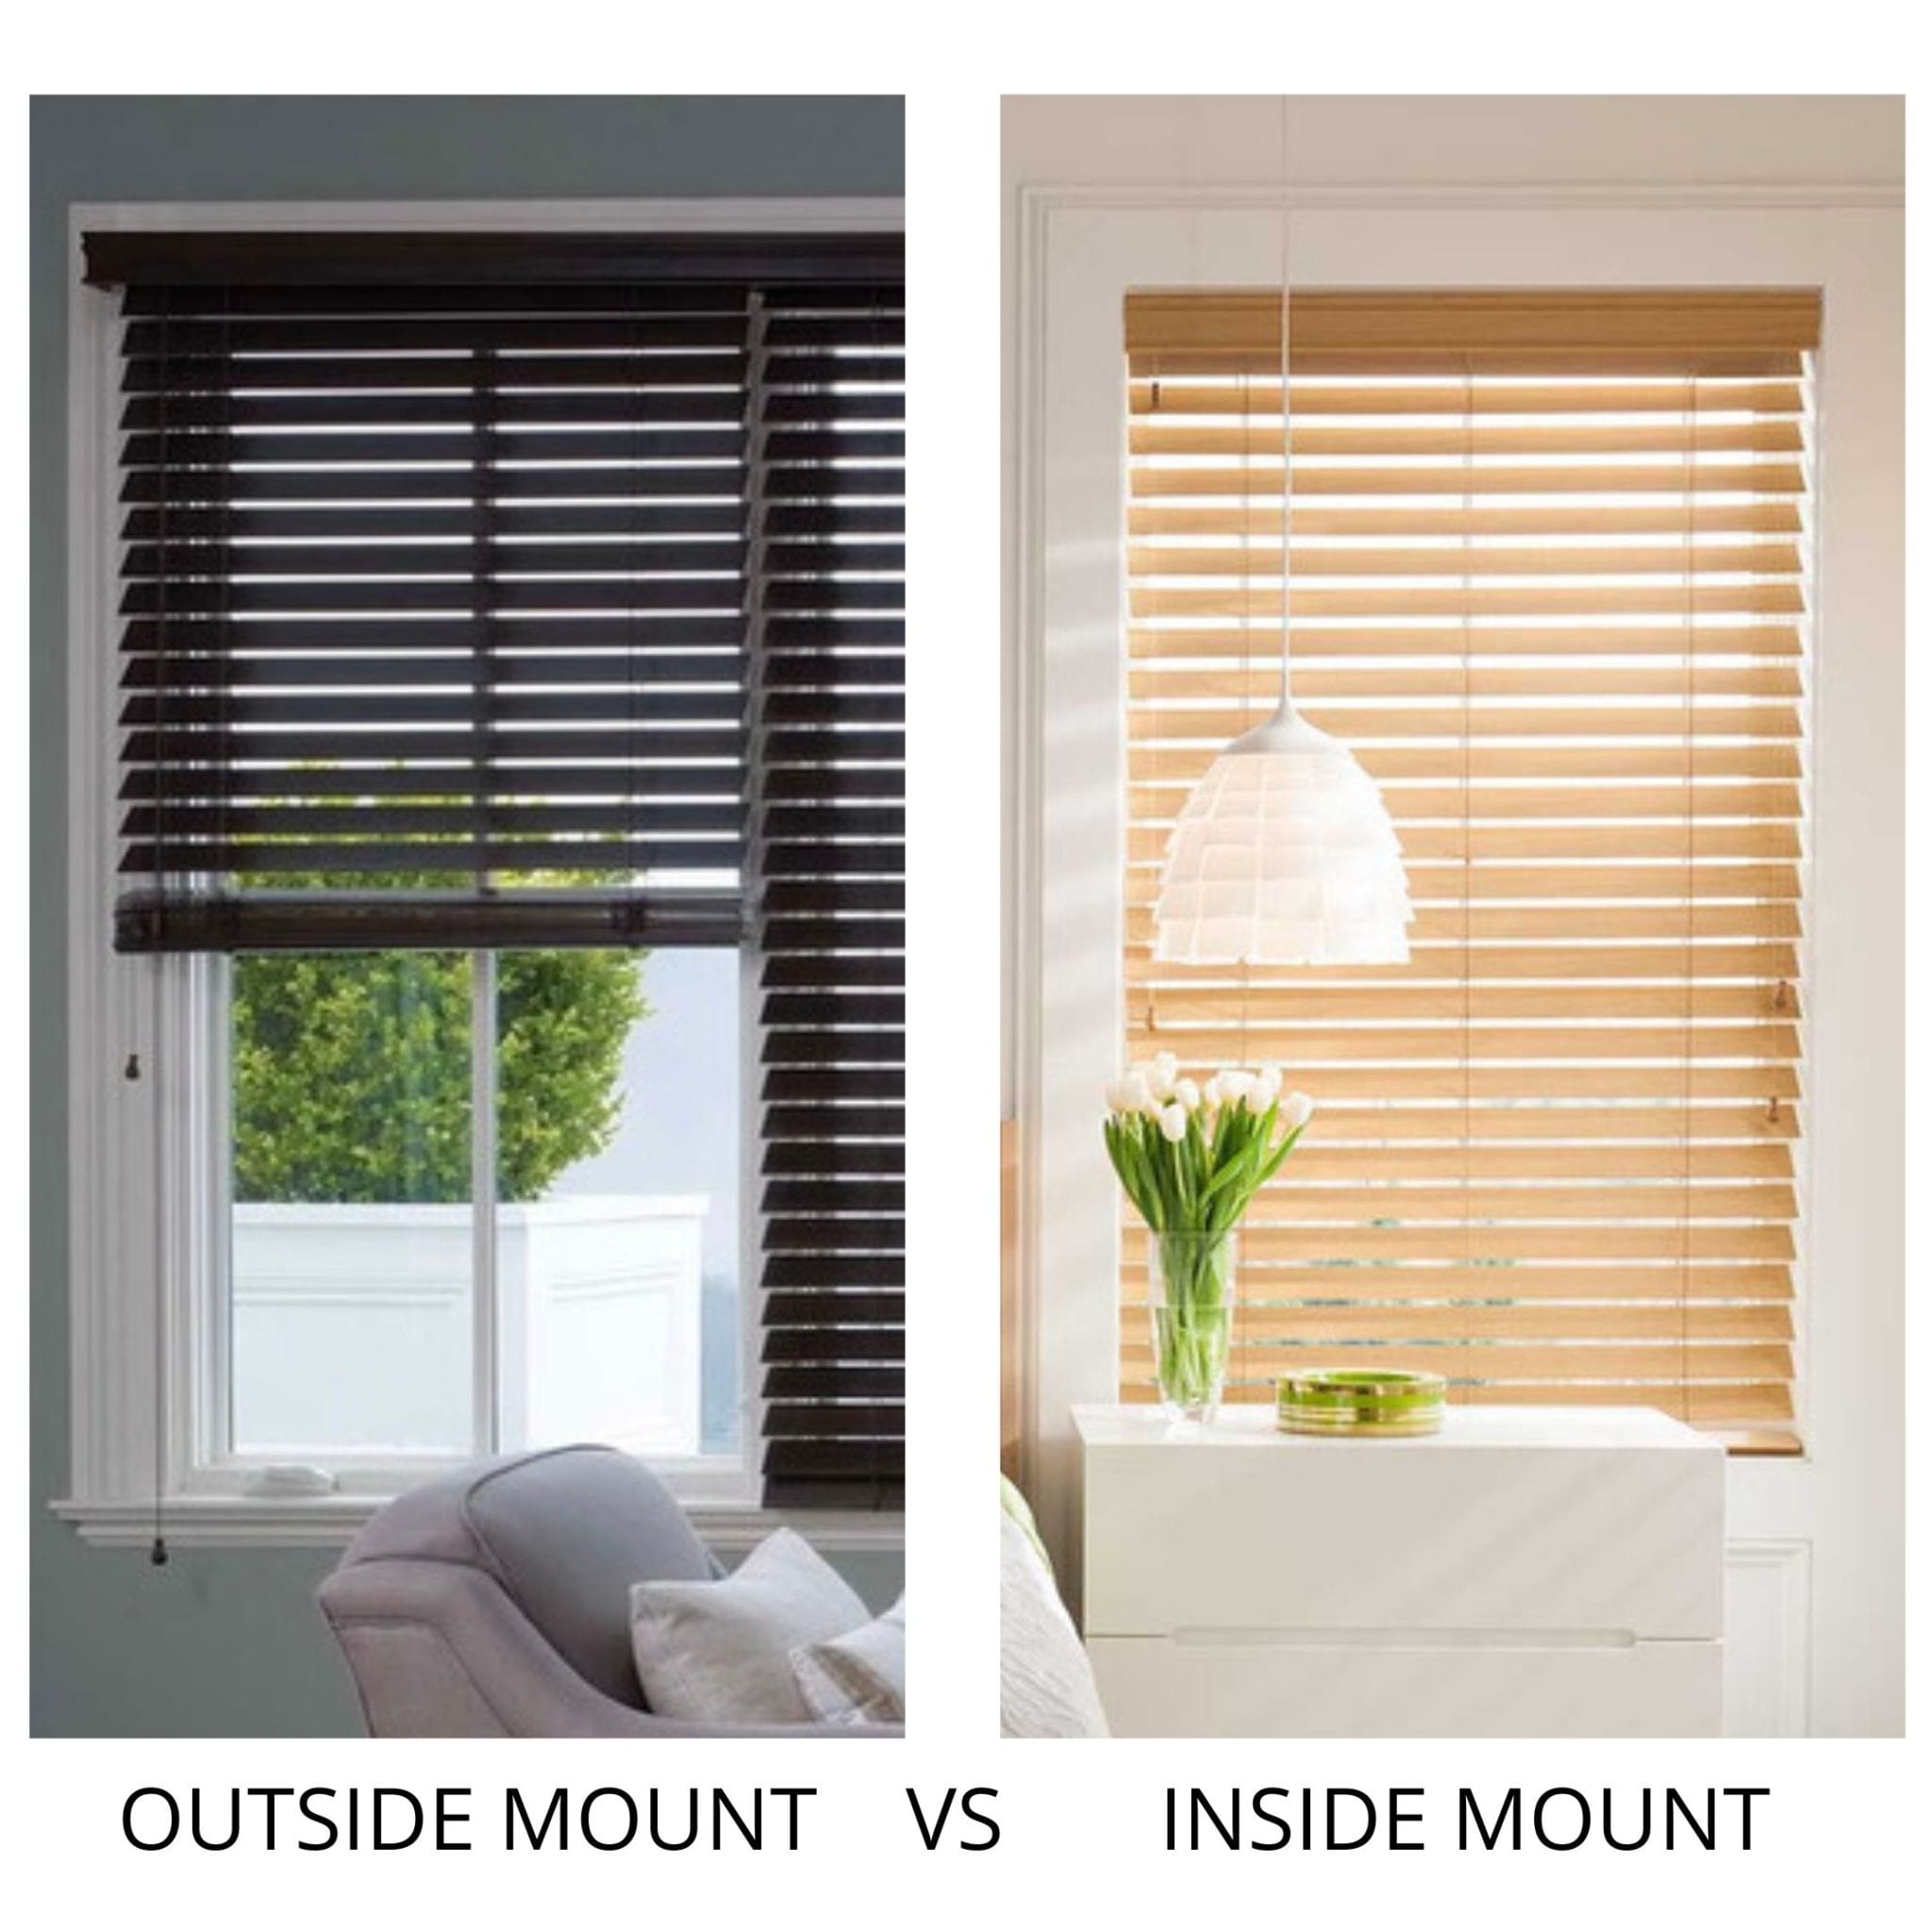 How To Install Blinds Outside Mount Installation: Inside Mount vs Outside Mount - Blind Spot